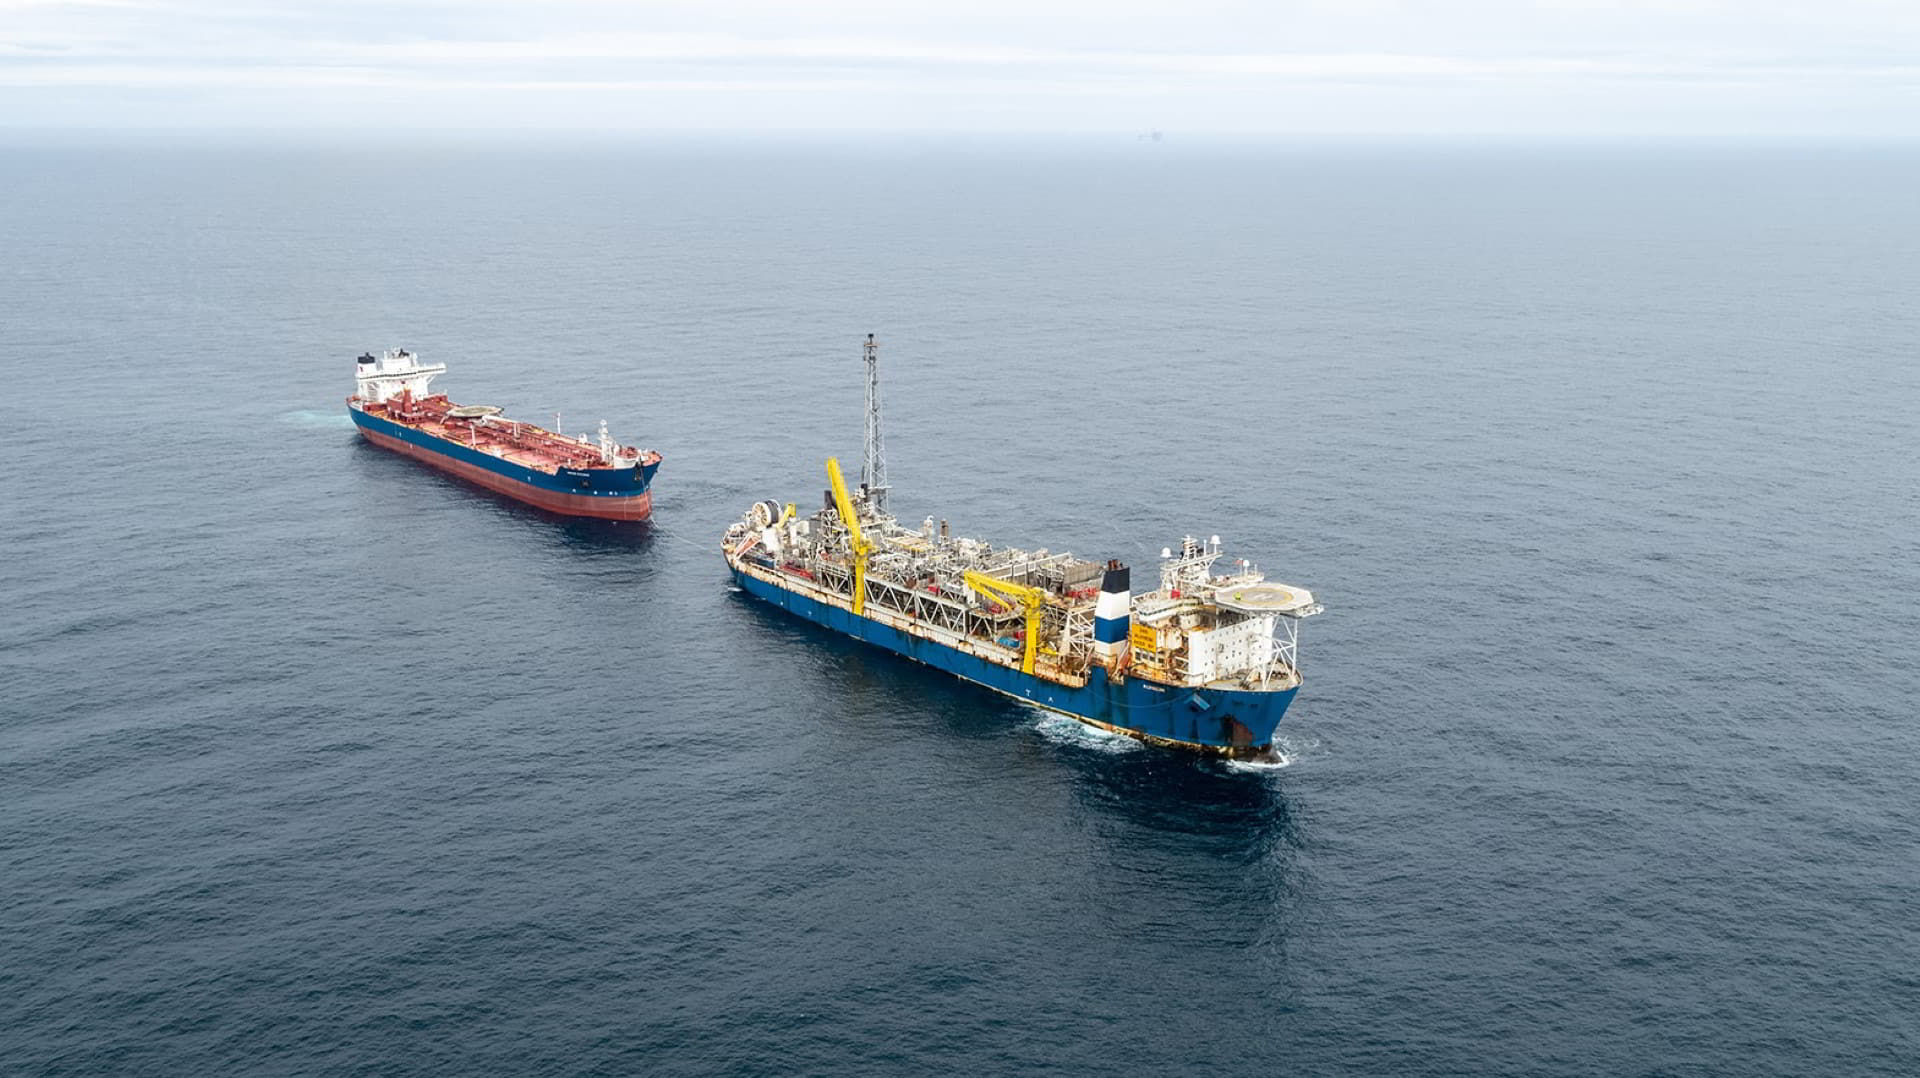 Kongsberg Maritime completes major upgrade of safety and automation systems on Aker BP’s FPSO